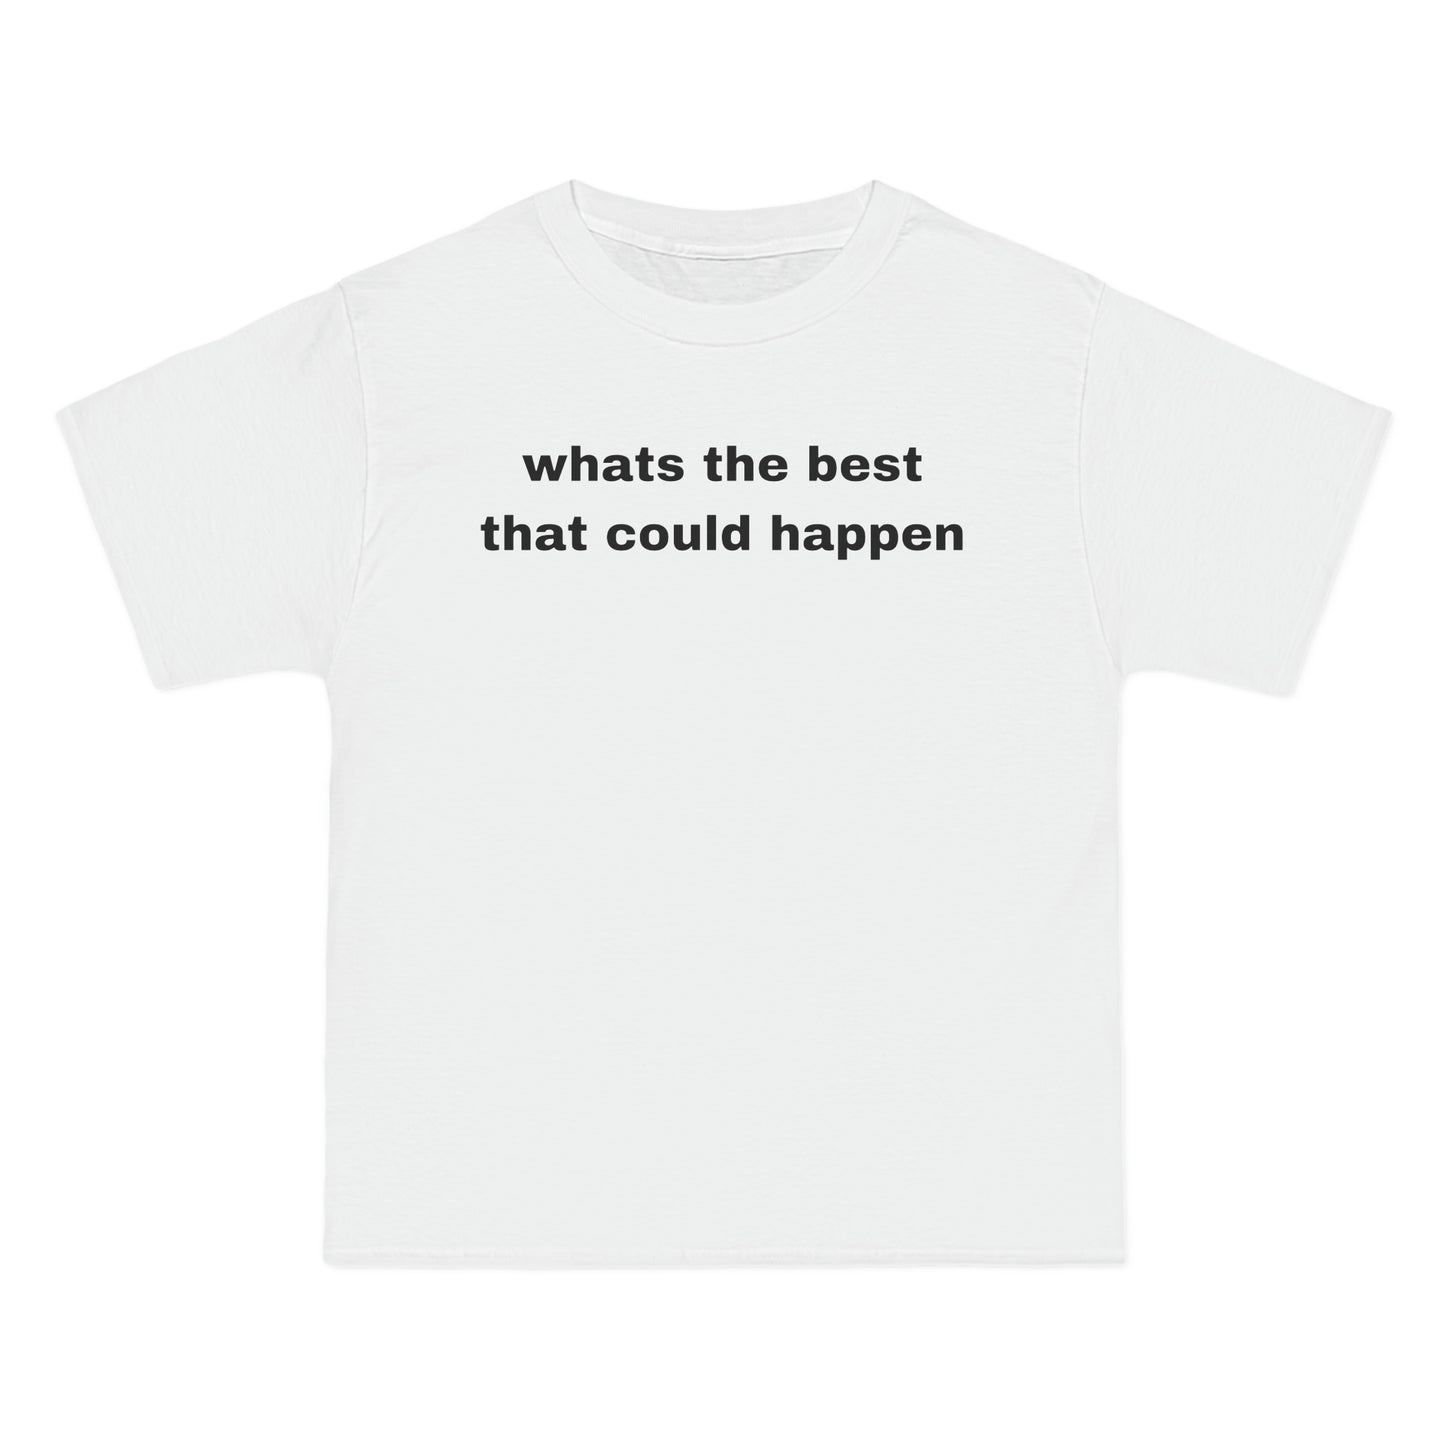 whats the best that could happen Tee